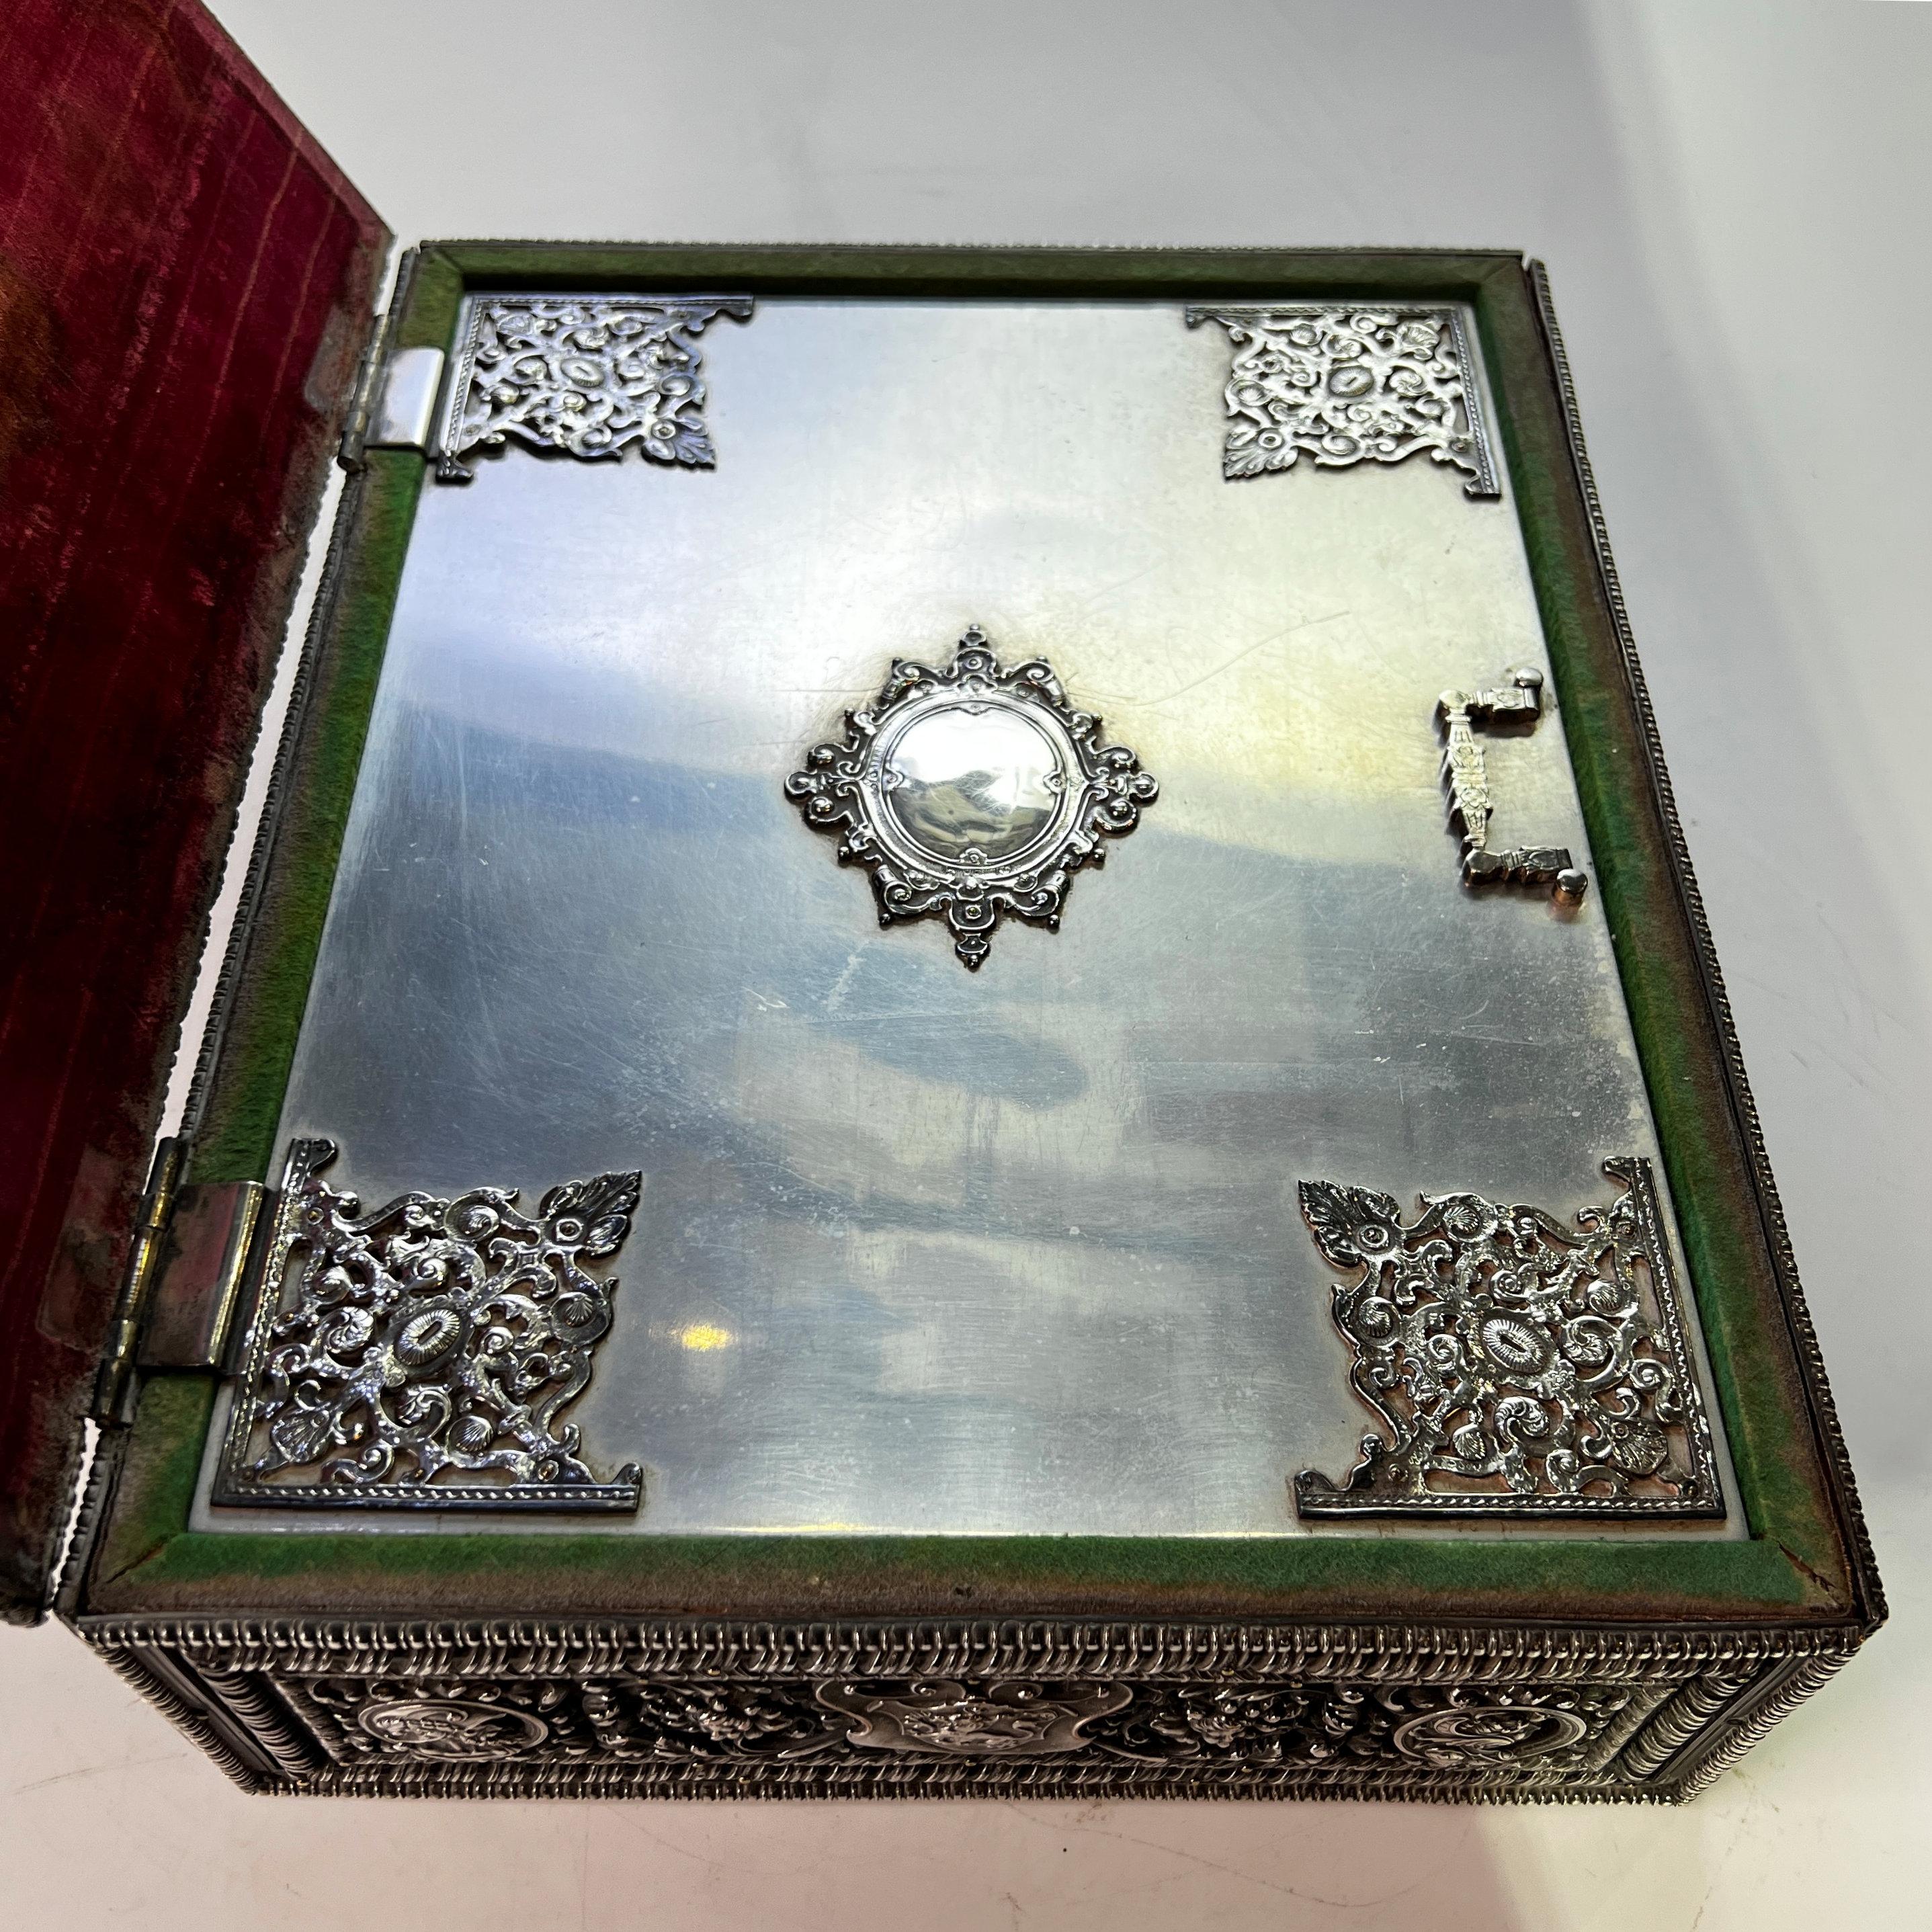 20th Century E.F. Caldwell Silverplated Humidor Box in Renaissance Style